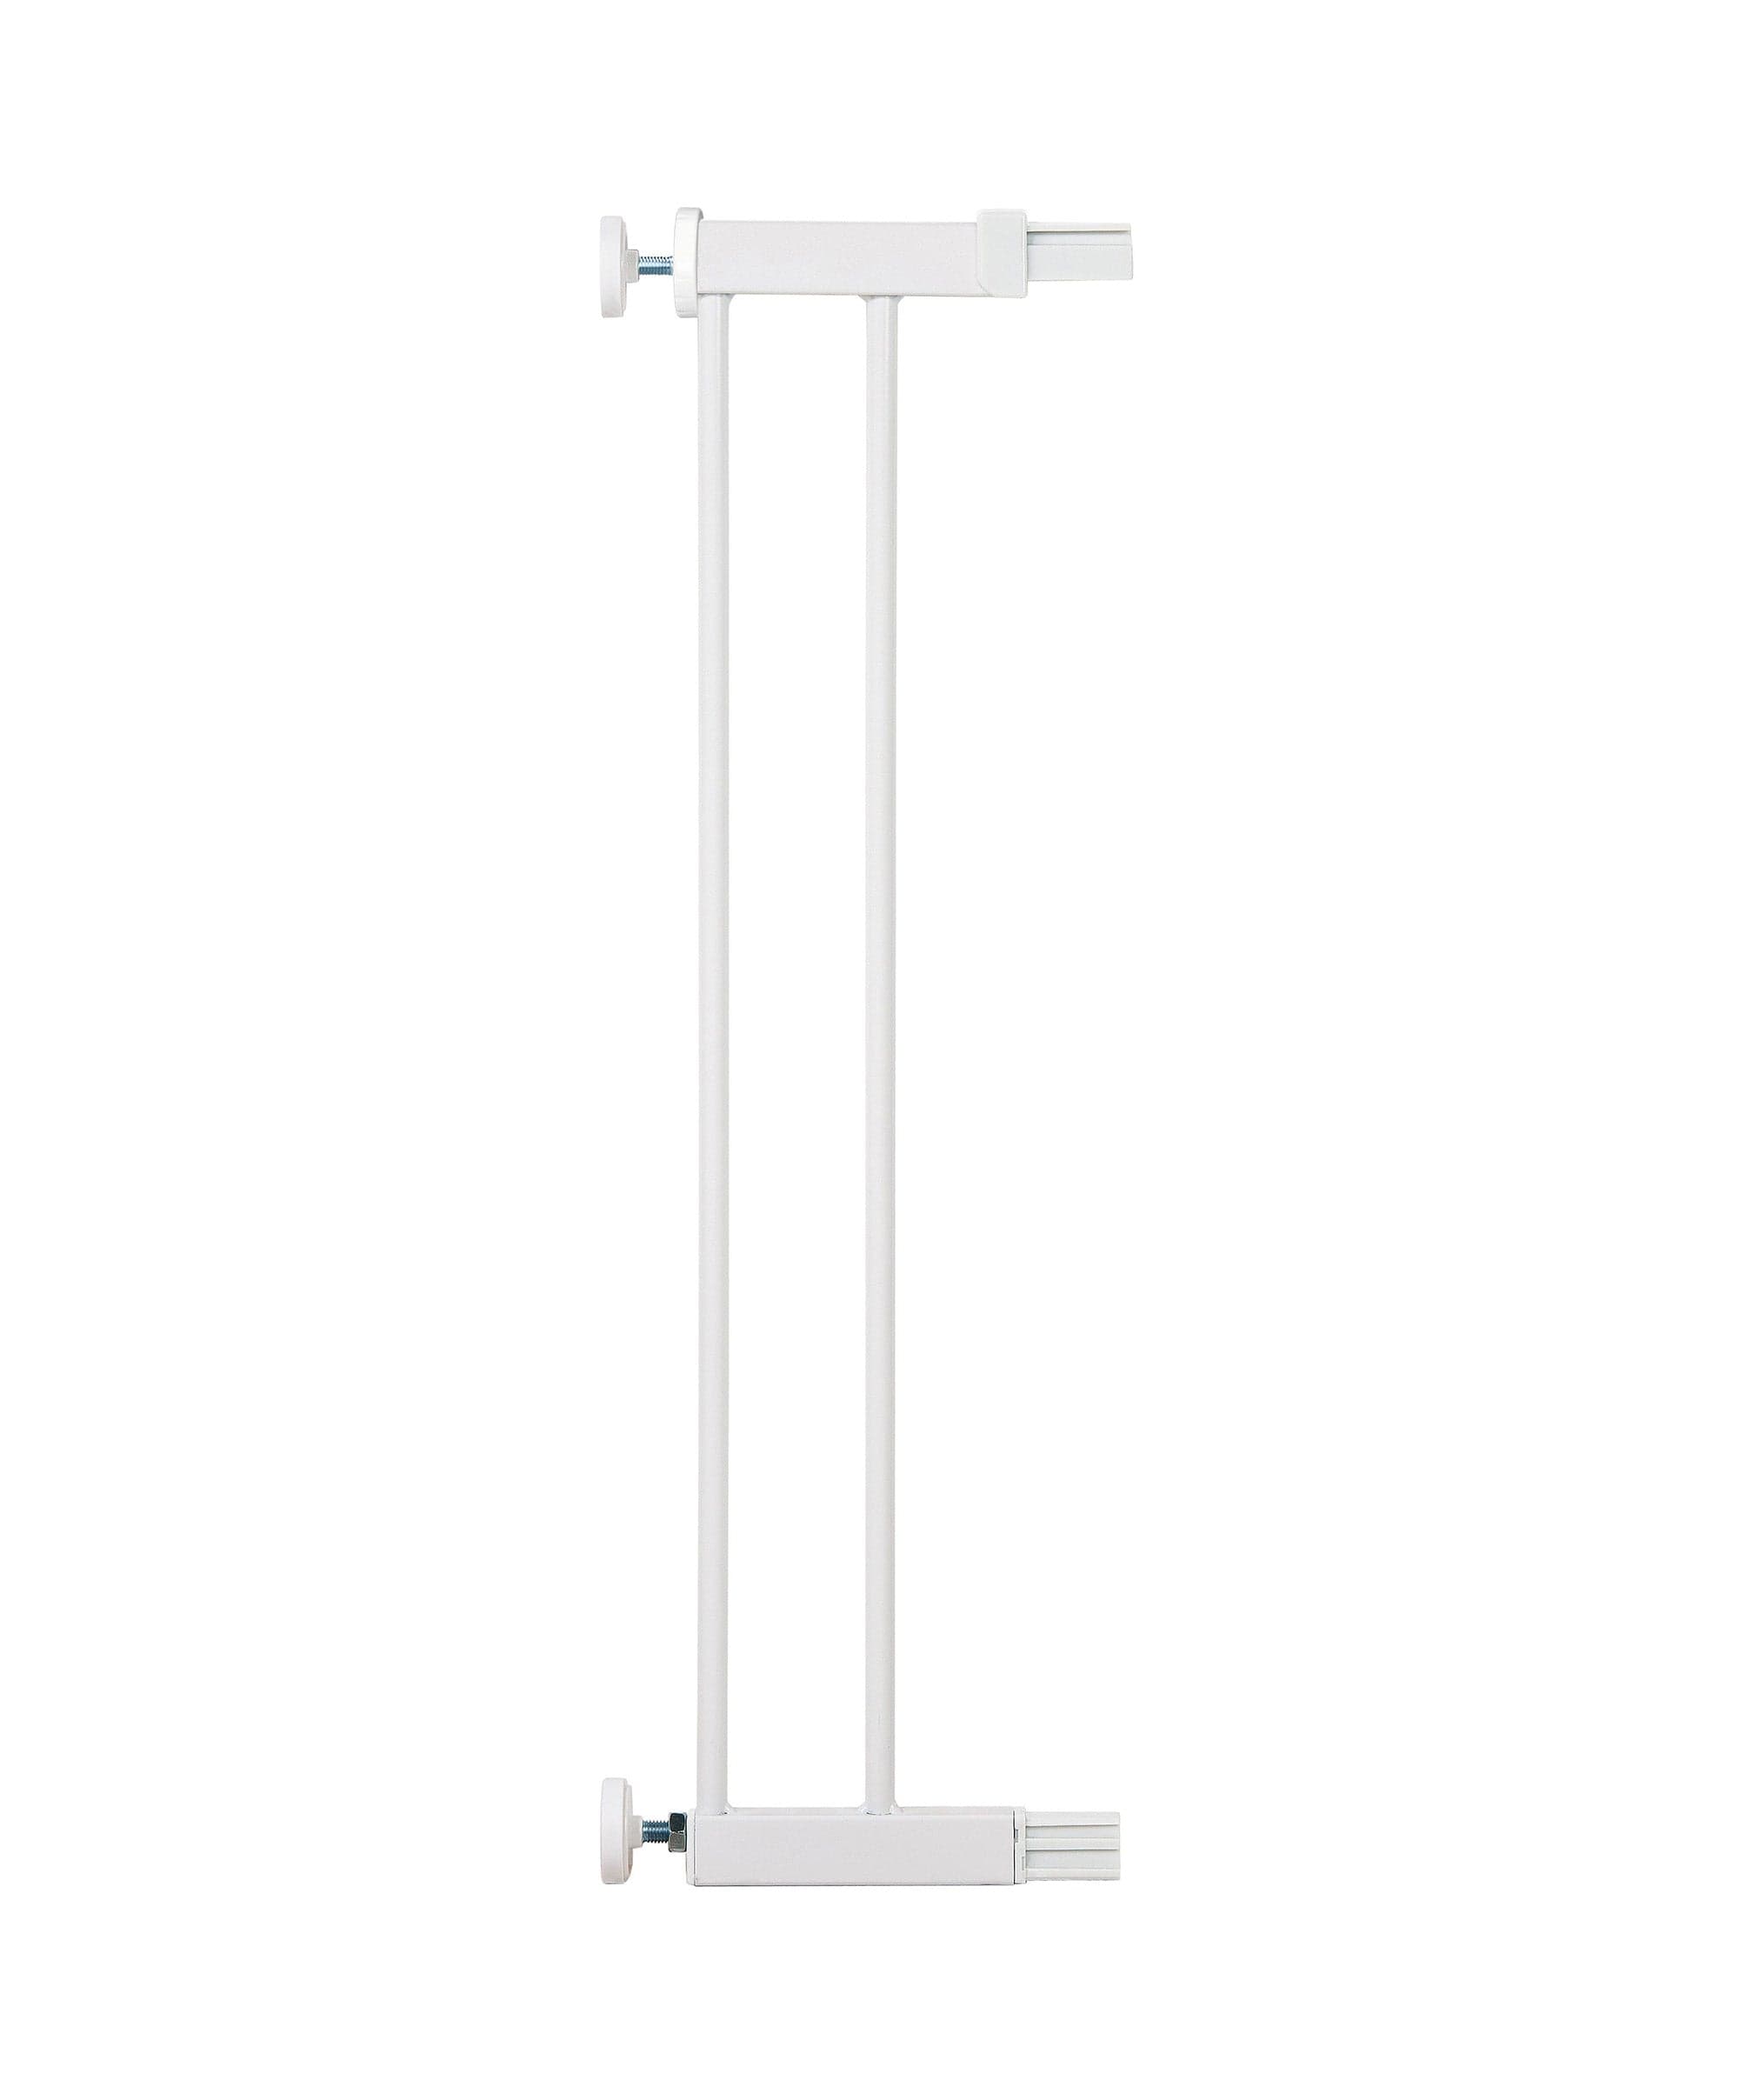 Safety 1st Easy Close Gate 14cm Extension - White